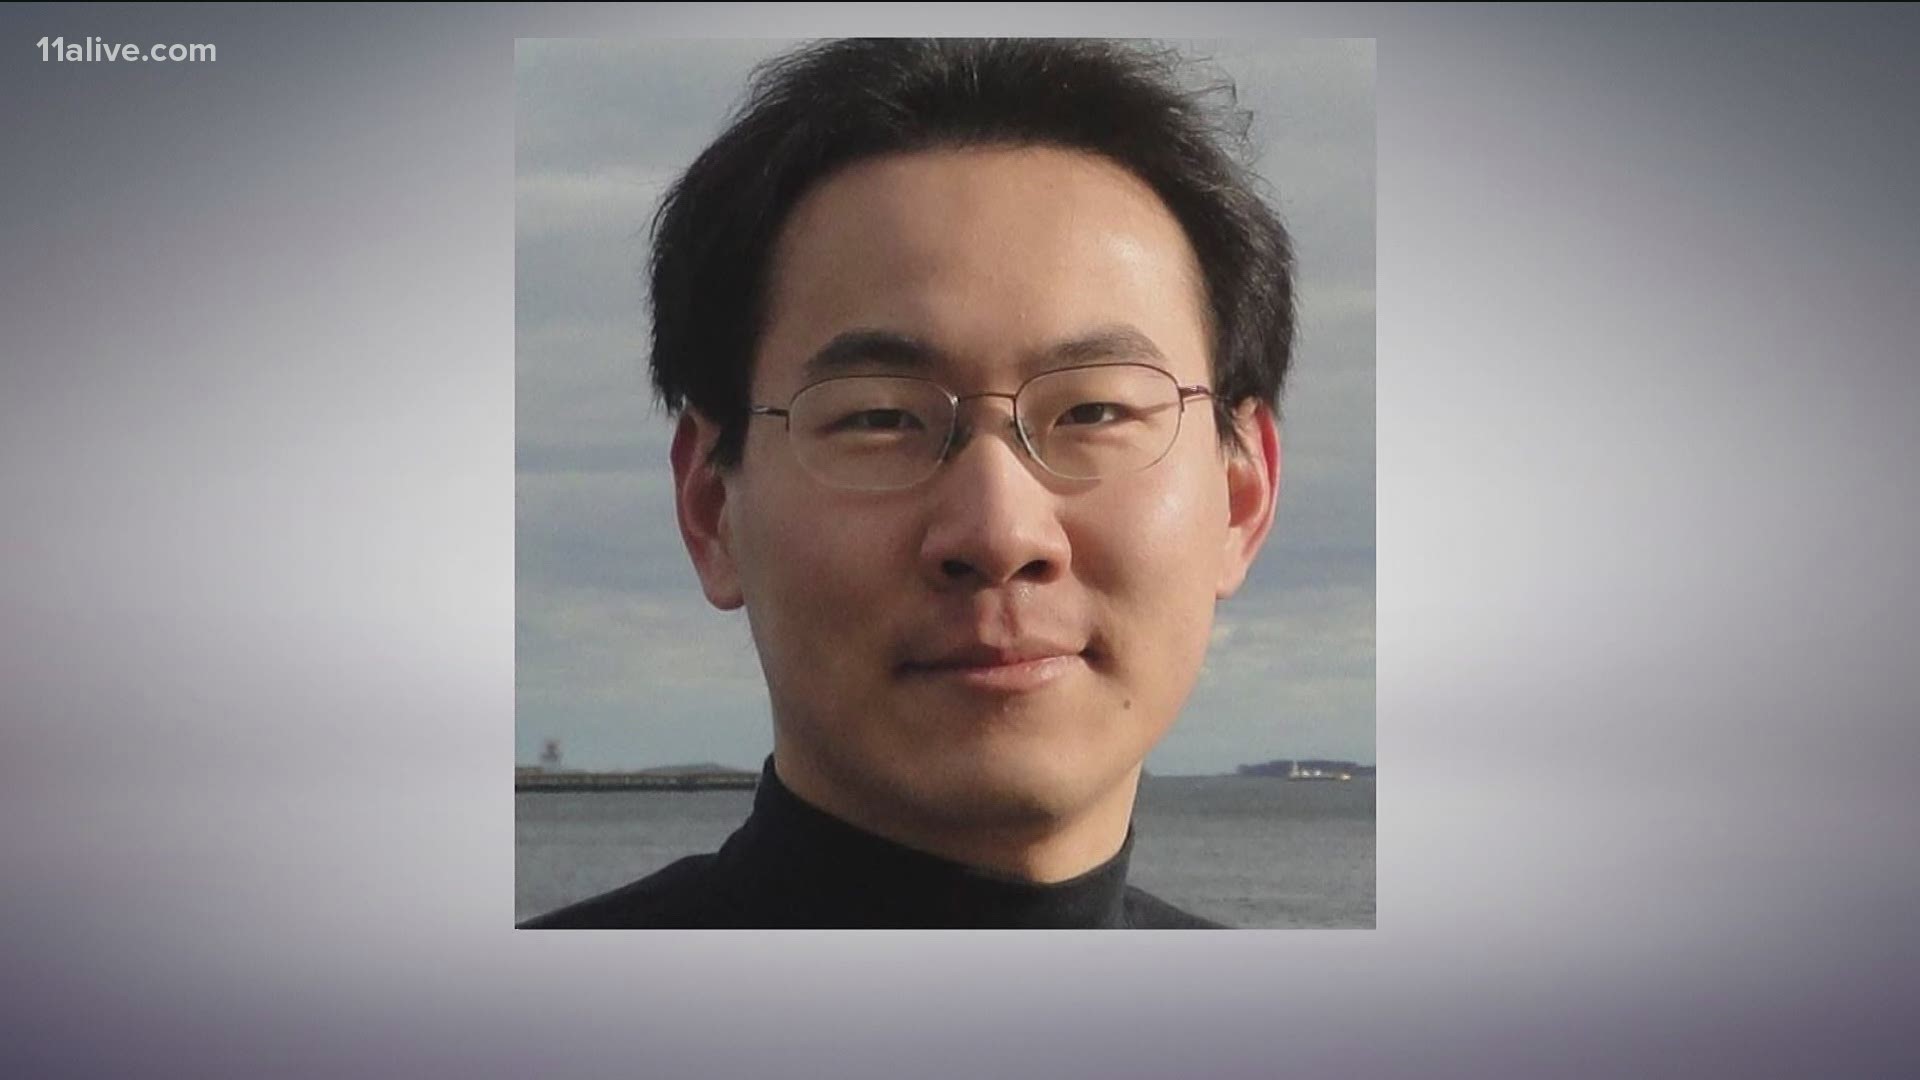 U.S. Marshals made the arrest of Qinxuan Pan, who is charged in Connecticut in the death of 26-year-old Kevin Jiang.